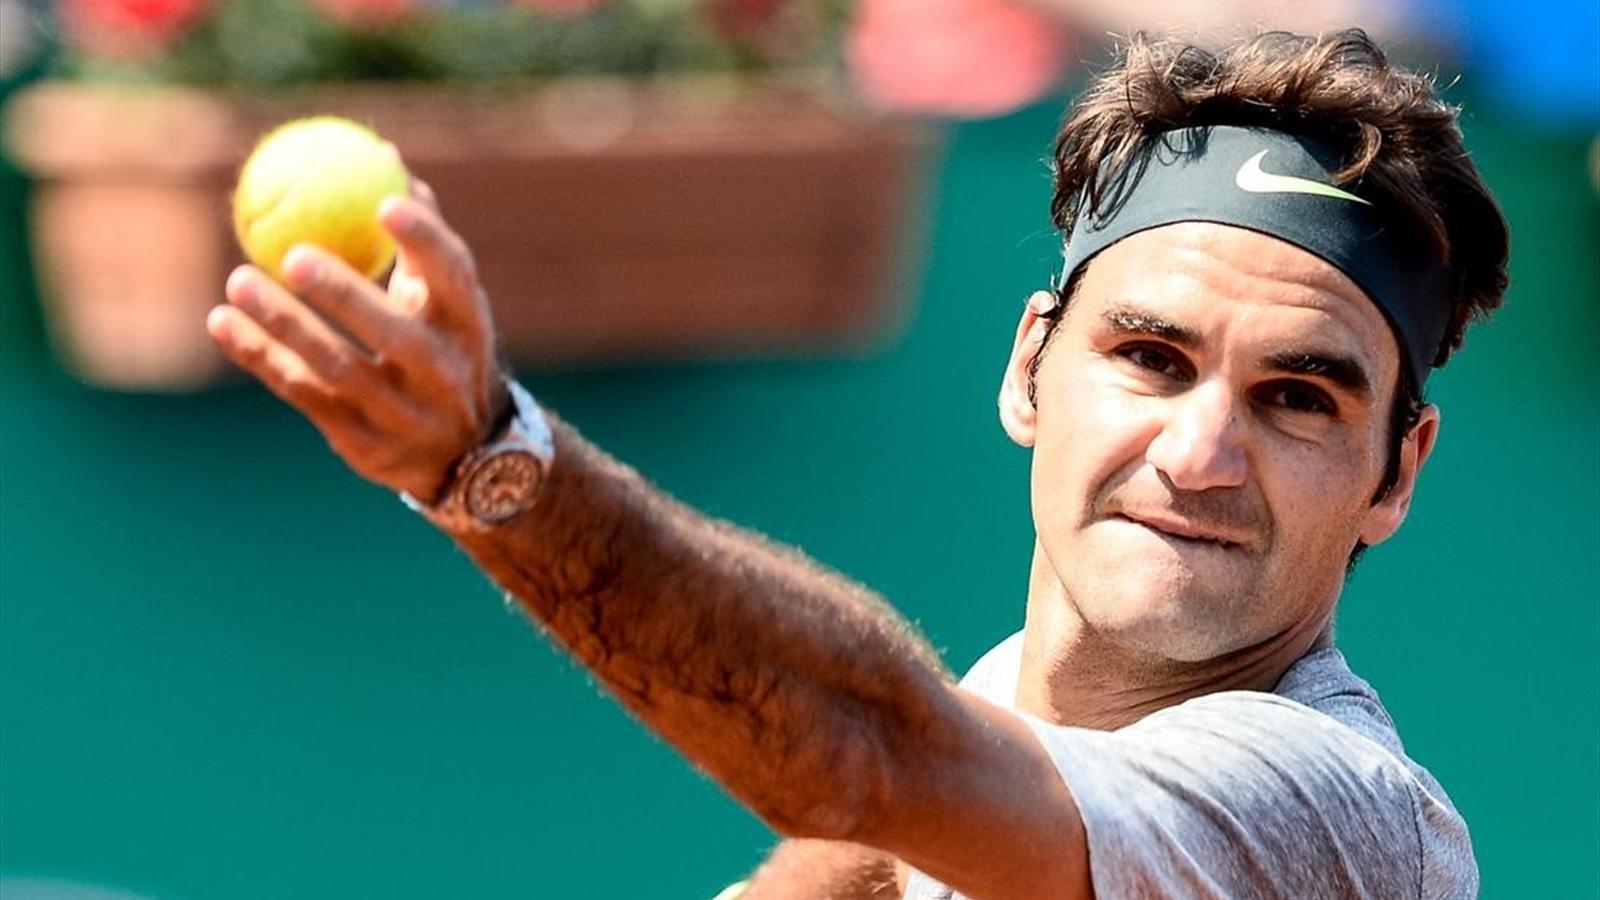 Roger Federer Moves into Quarterfinals: Istanbul Open | Movie TV Tech Geeks News1600 x 900